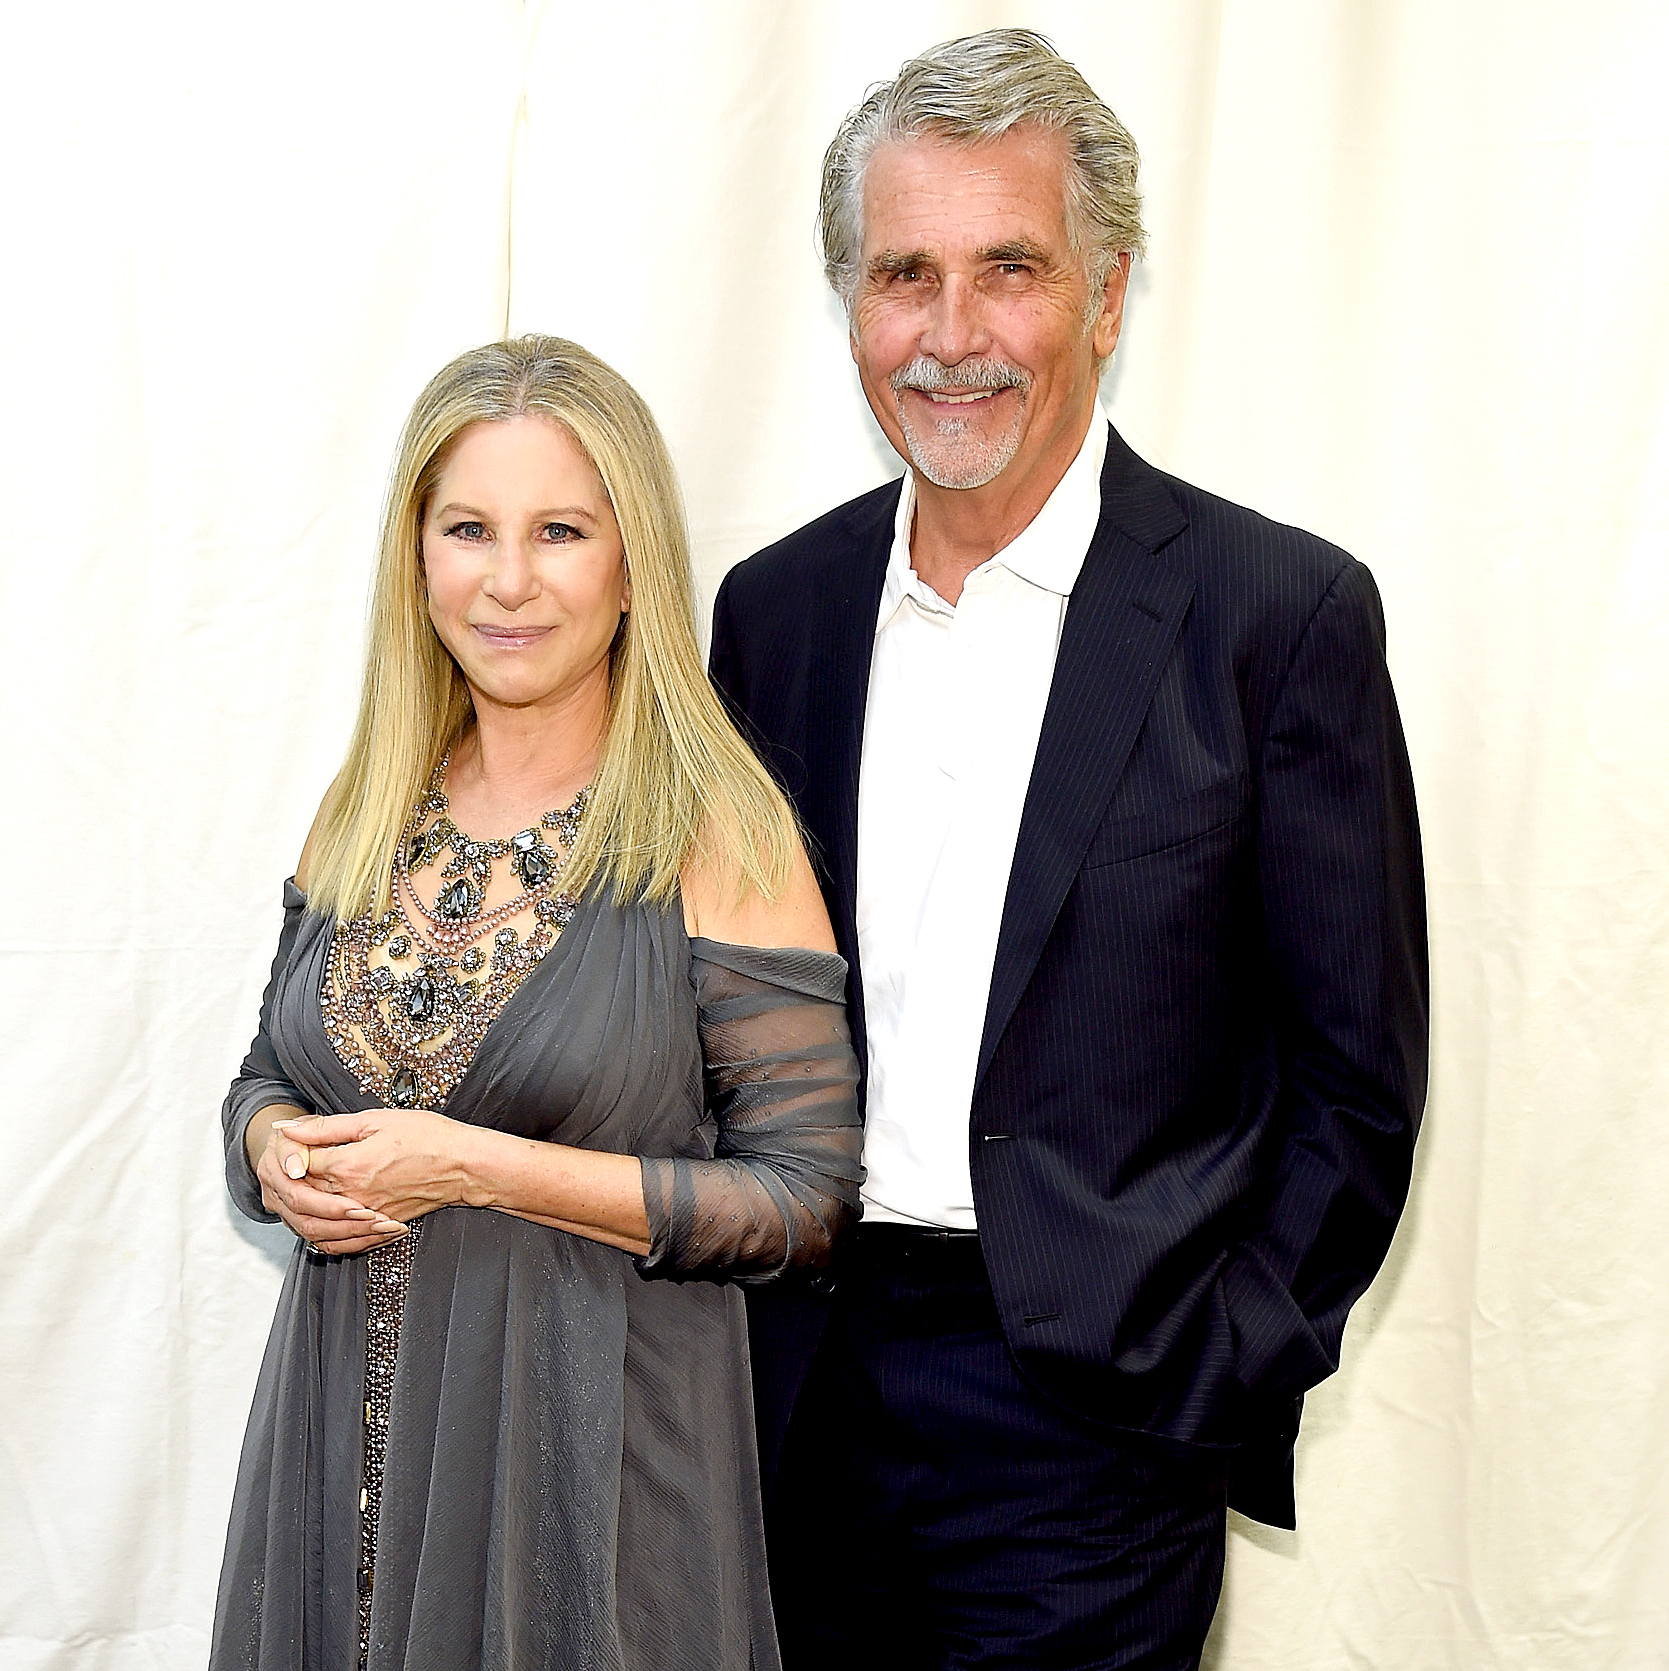 Meet James Brolin Wife As He Shares His Secret To Successful Marriage